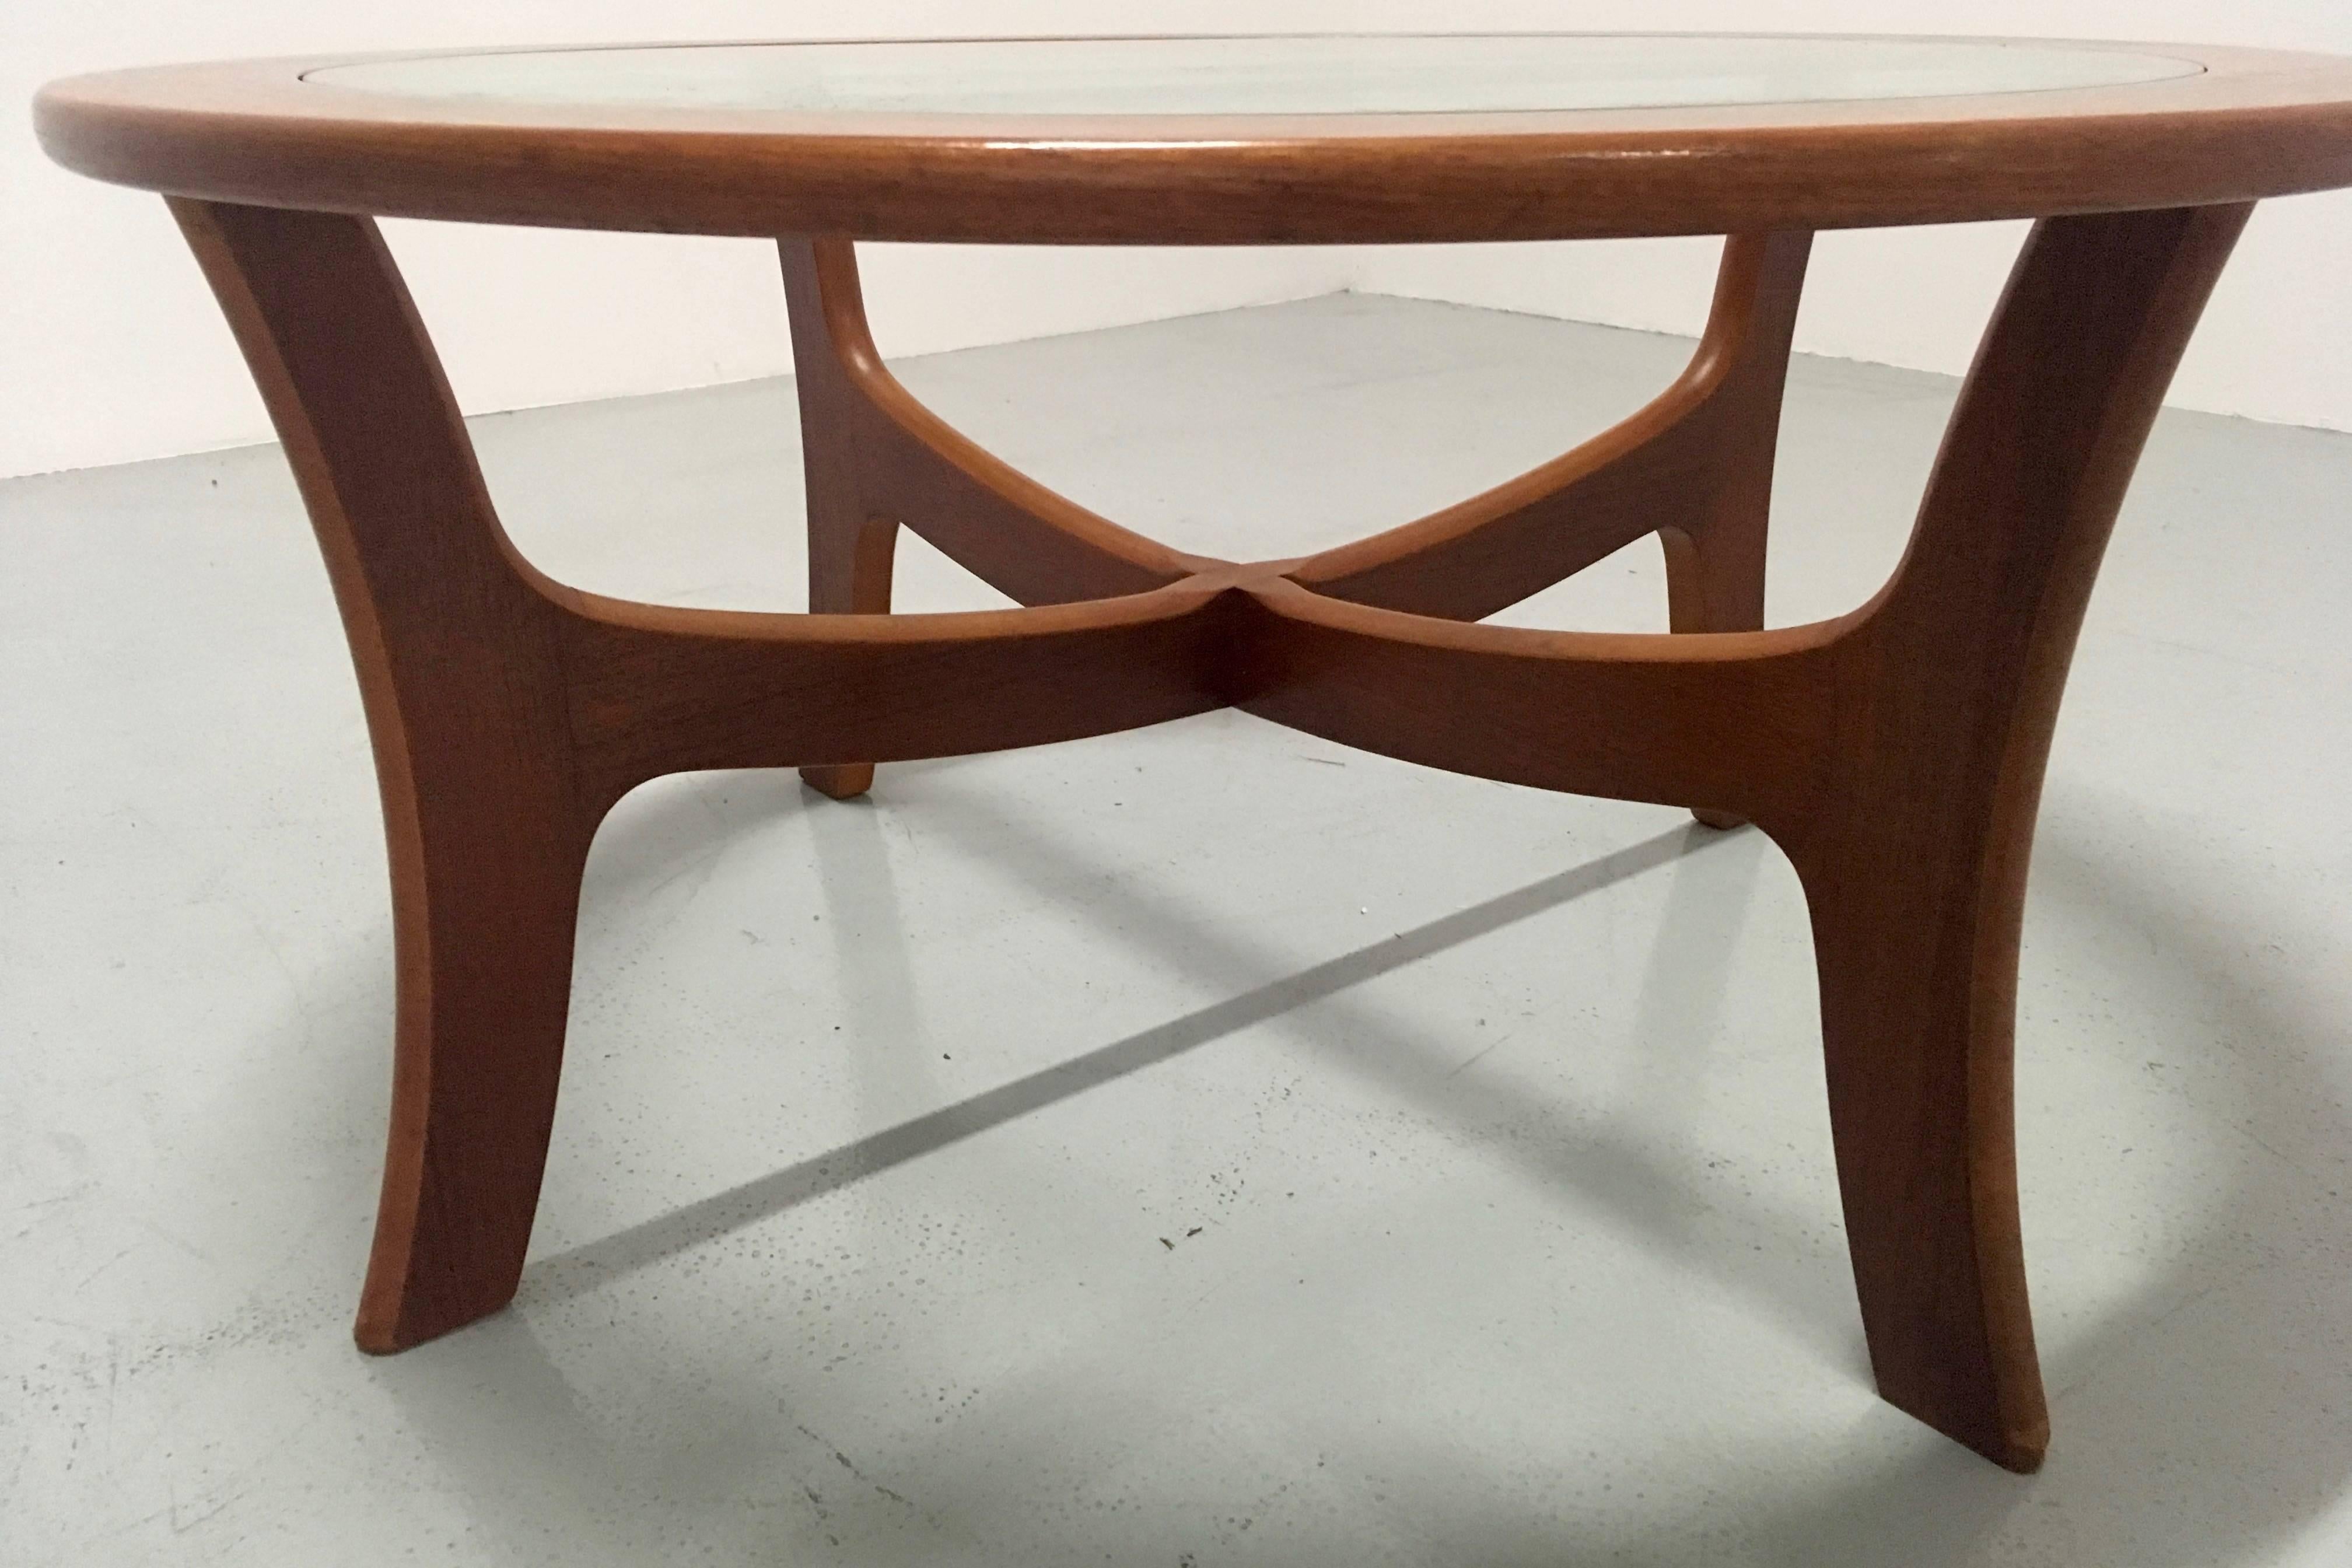 This elegant round coffee table is made of solid teak and comes with a glass top. It was designed in the 1960s with a clear Danish influence. It was produced by G-Plan in the 1970s.